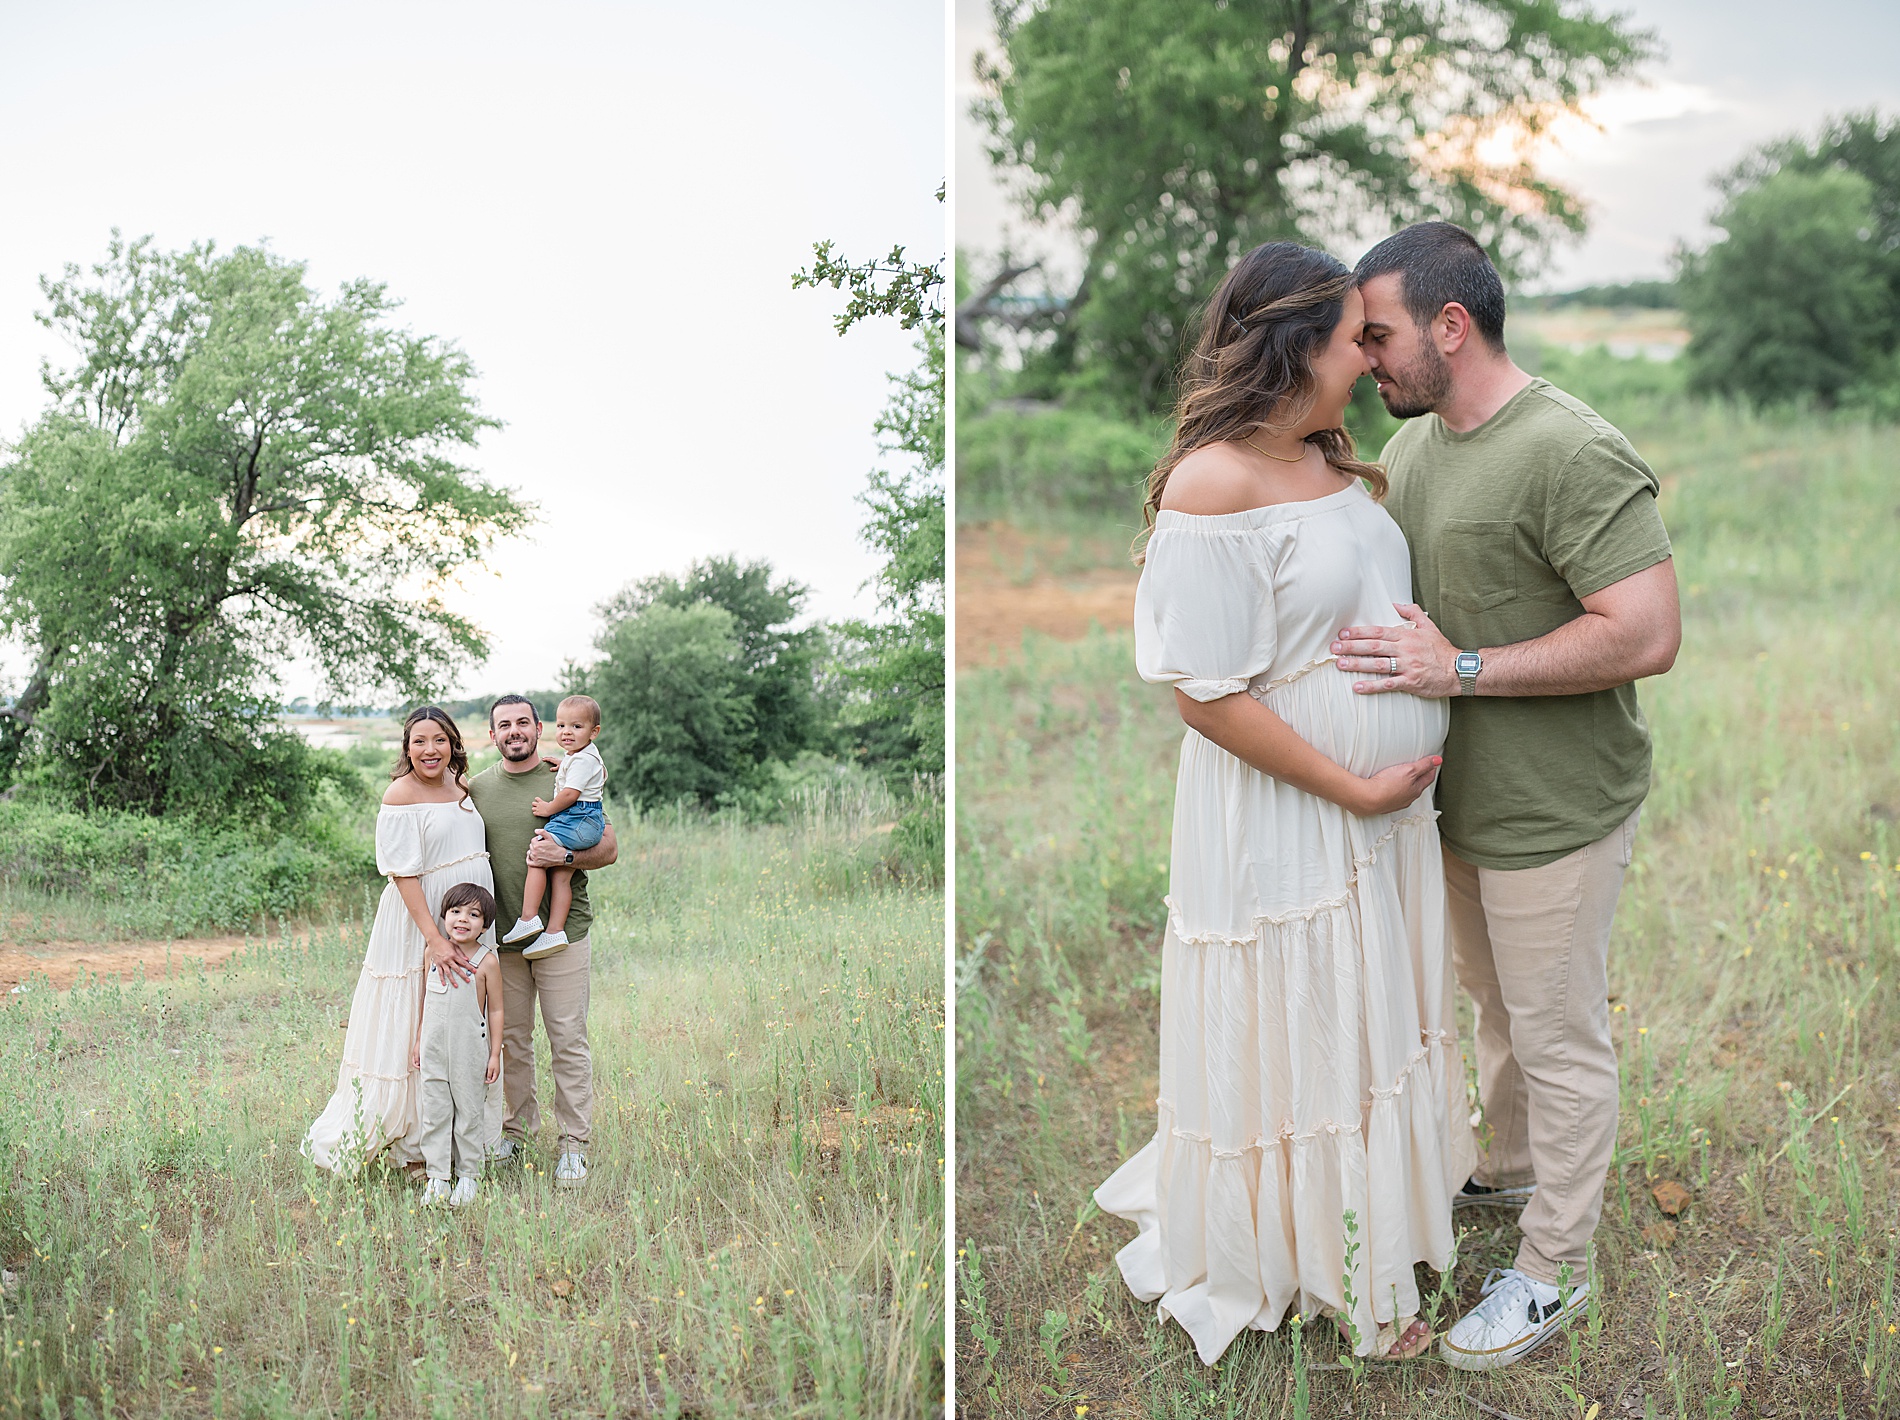 Top 11 Dallas-Fort Worth Picture Locations at Murrell park taken by Lindsey Dutton Photography, a Dallas Family photographer
